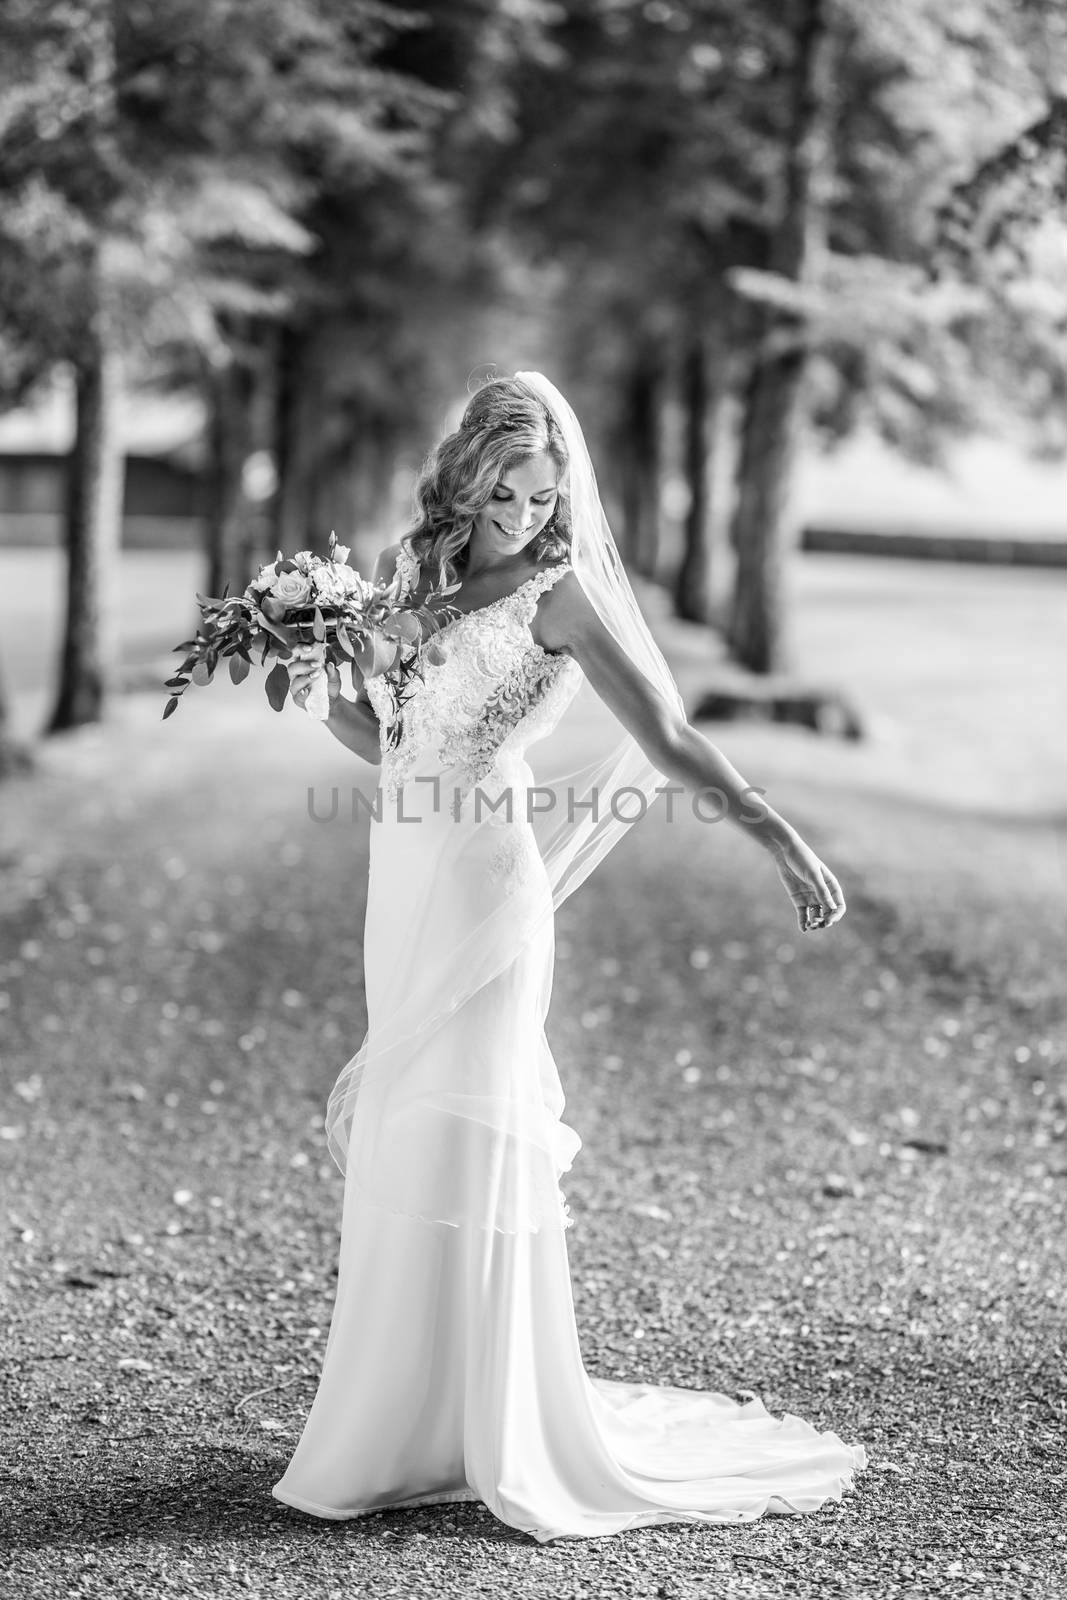 Full length portrait of beautiful sensual young blond bride in long white wedding dress and veil, holding bouquet outdoors in natural background. Black and white photo.